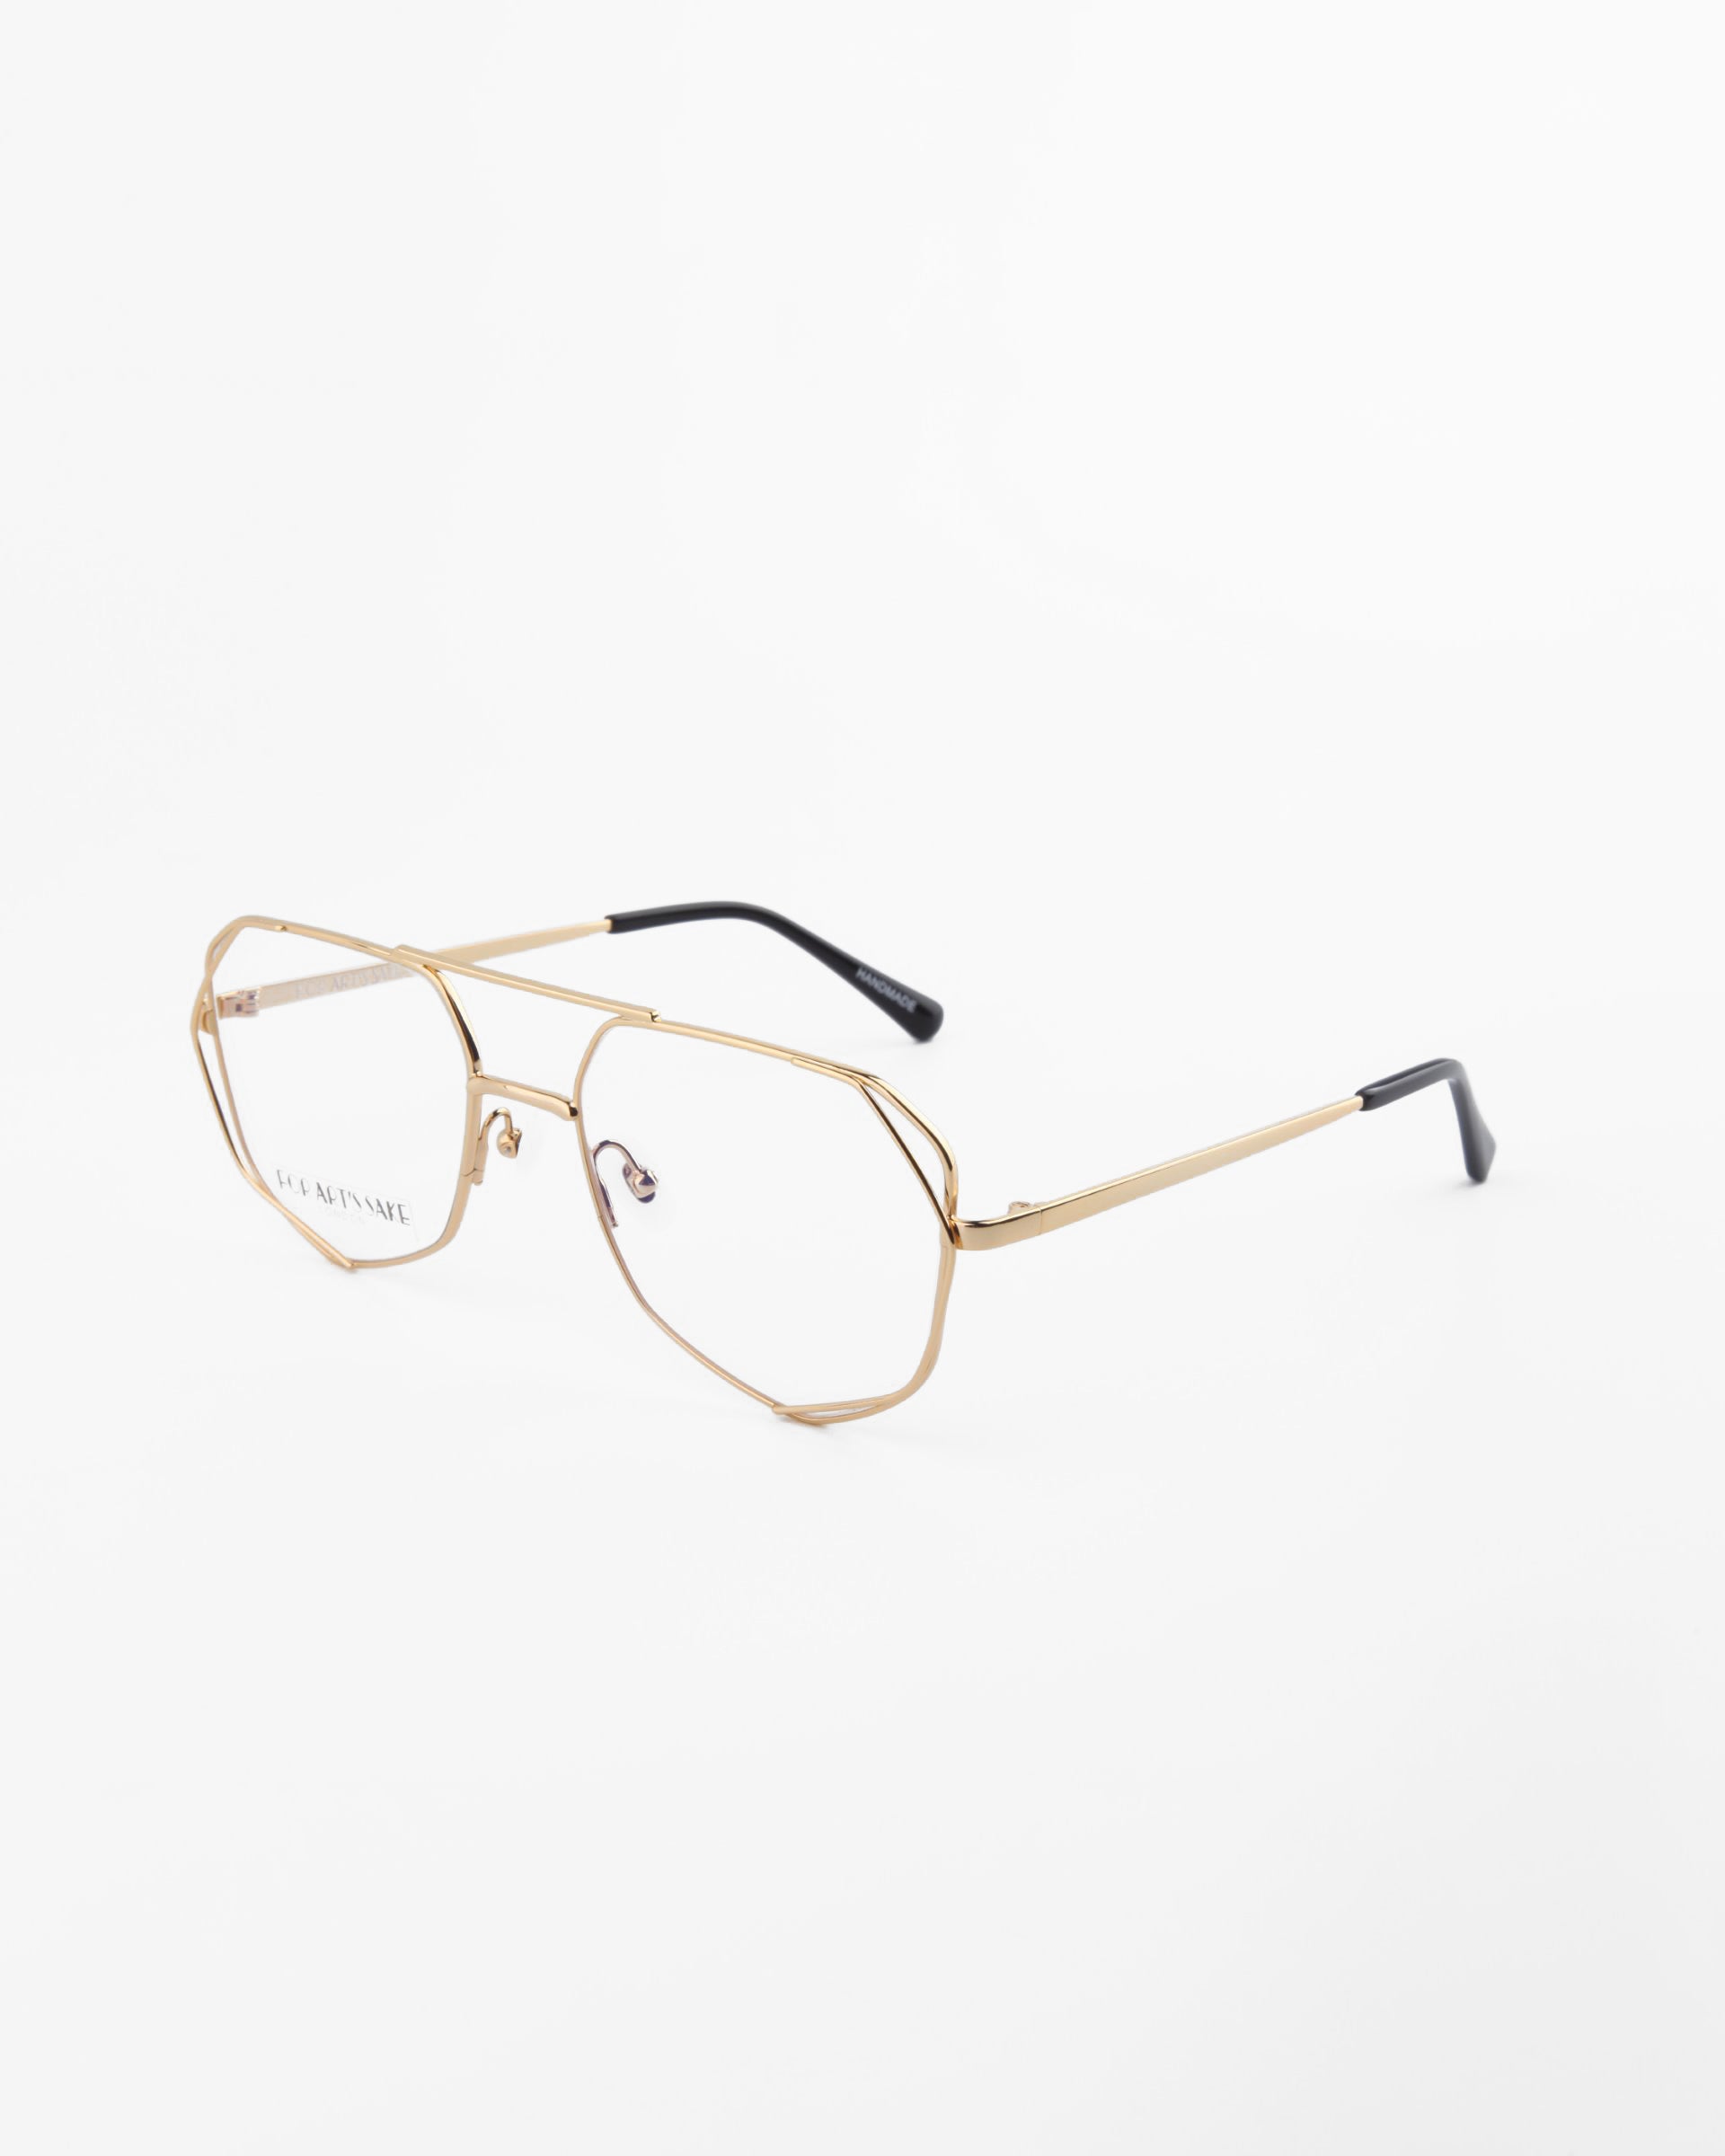 A pair of gold-framed eyeglasses with a thin, geometric design and clear lenses featuring UV protection. The temples have black tips, and the words "For Art's Sake®" are visible on one lens. The Genius Two glasses rest on a white background.